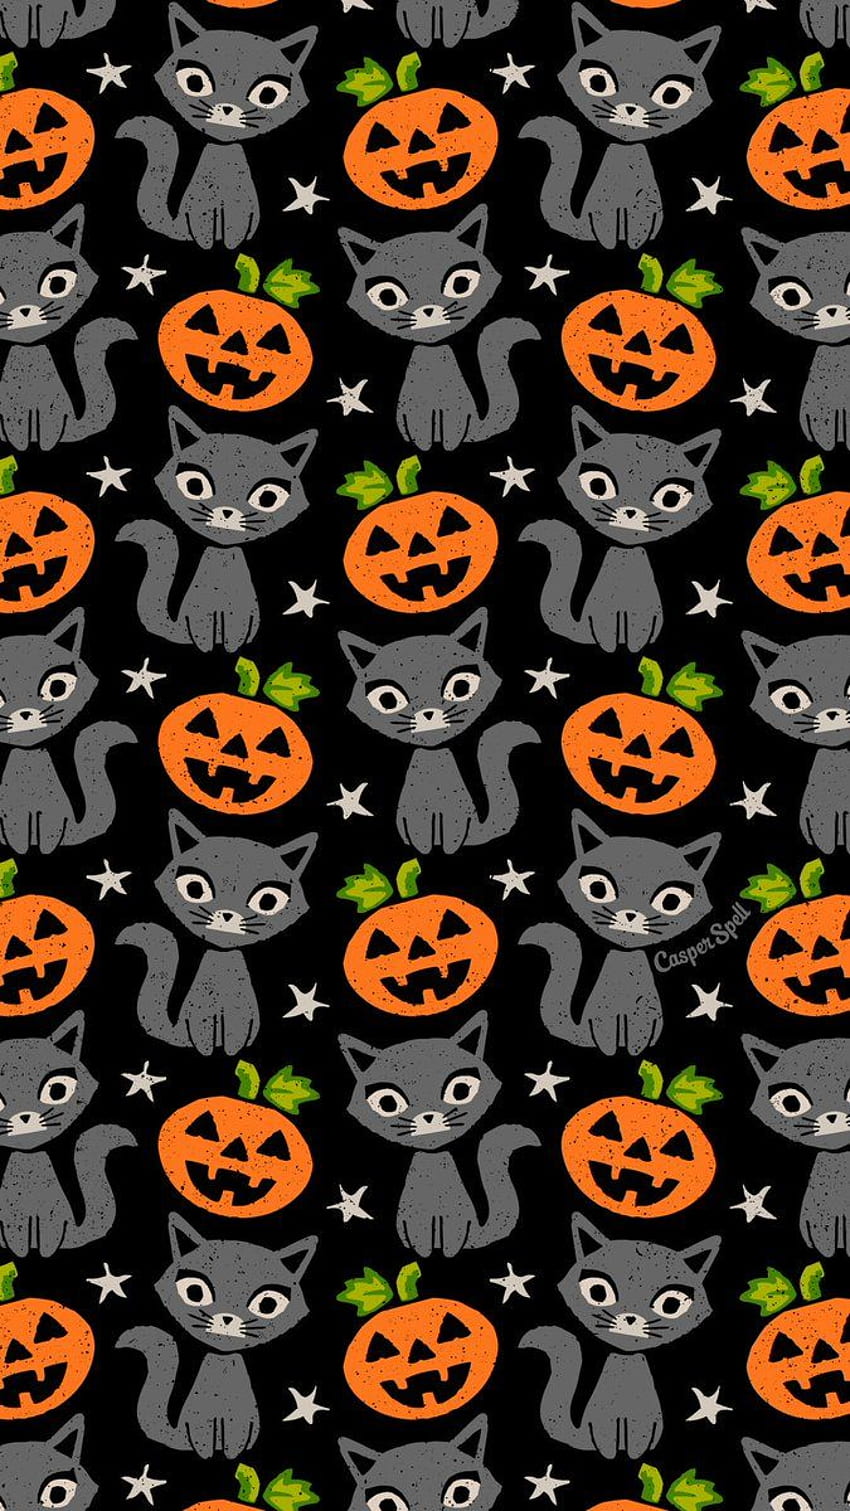 Casper Spell - 60's Witchy Cat & Halloween Pumpkins pattern. Feel to save as your phone lock screen. *For Personal Use ONLY. Enjoy! HD phone wallpaper